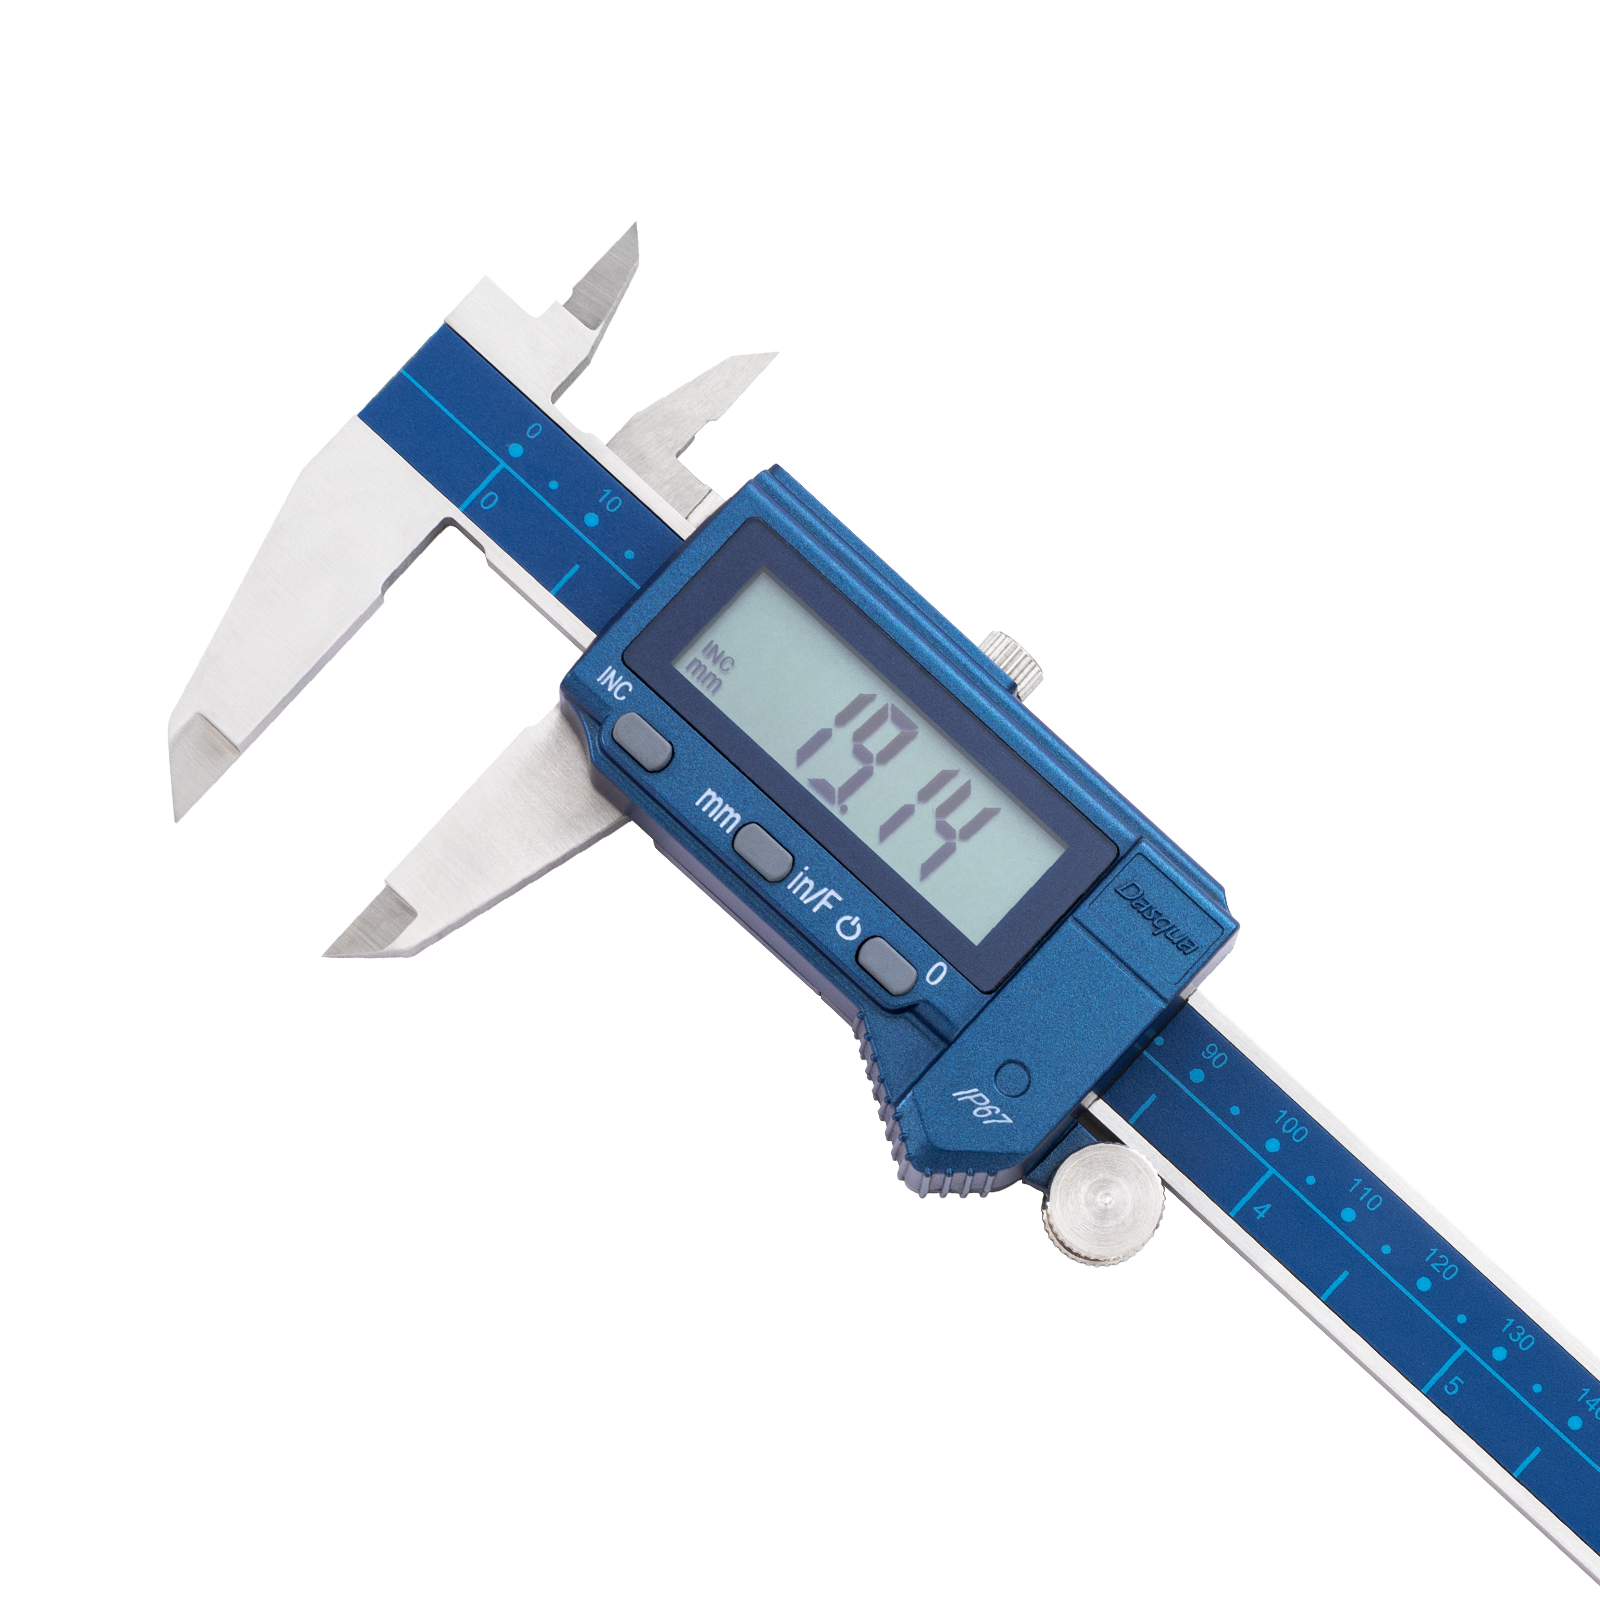 Dasqua Blu 2015-1005-A IP67 Waterproof 0-150 Mm Electronic Digital Caliper Accuracy Measuring Tool Stainless Steel With Auto-Off INC Inch/MM/Fractions